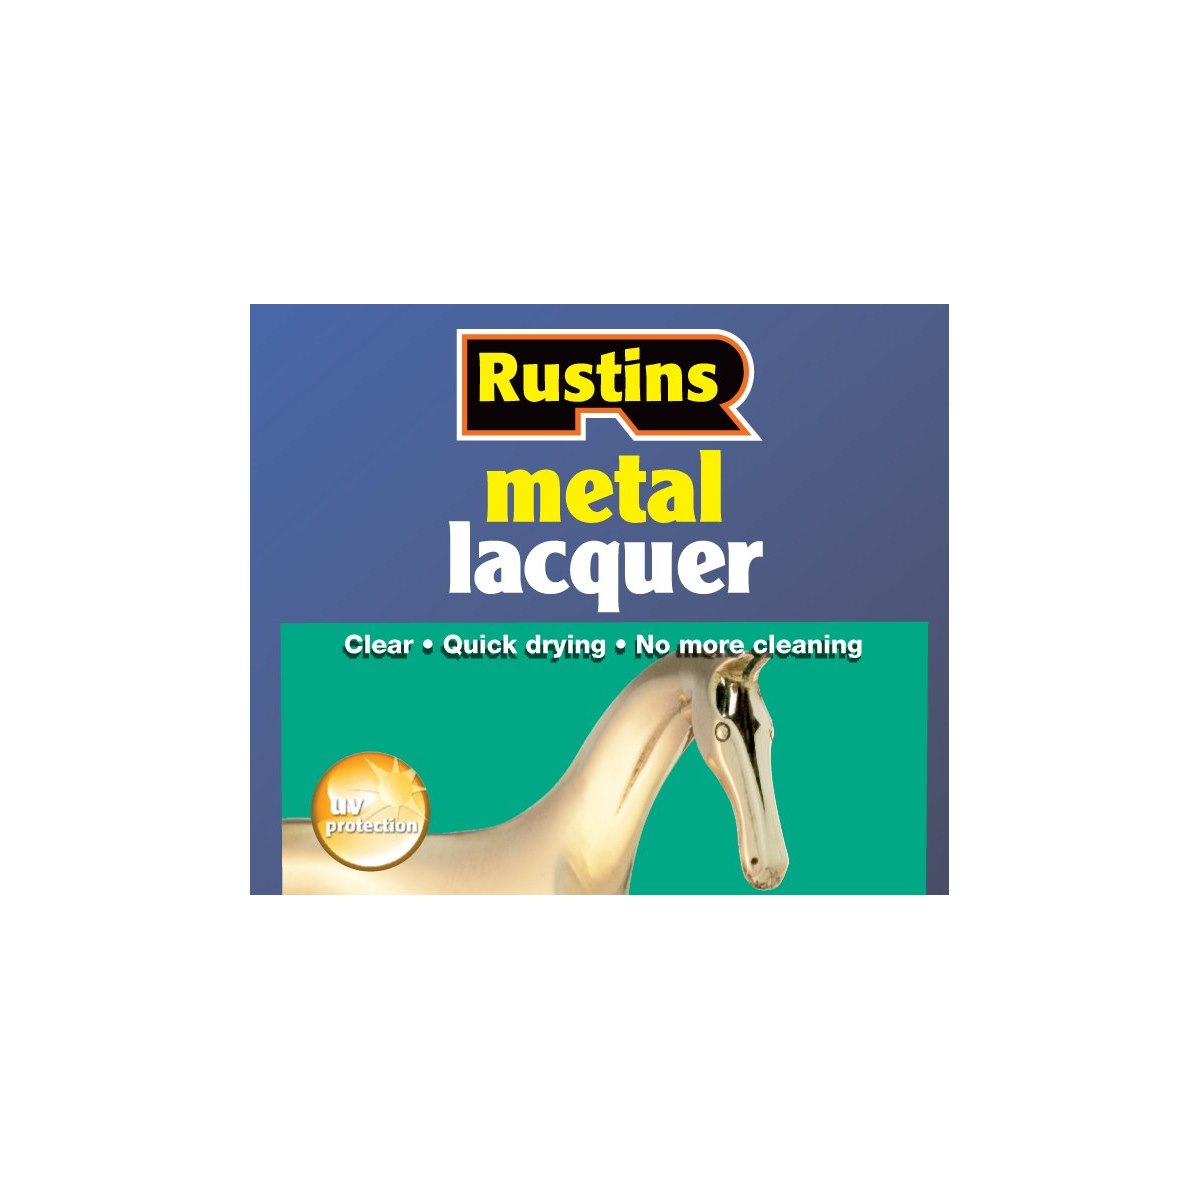 Rustins Metal Lacquer